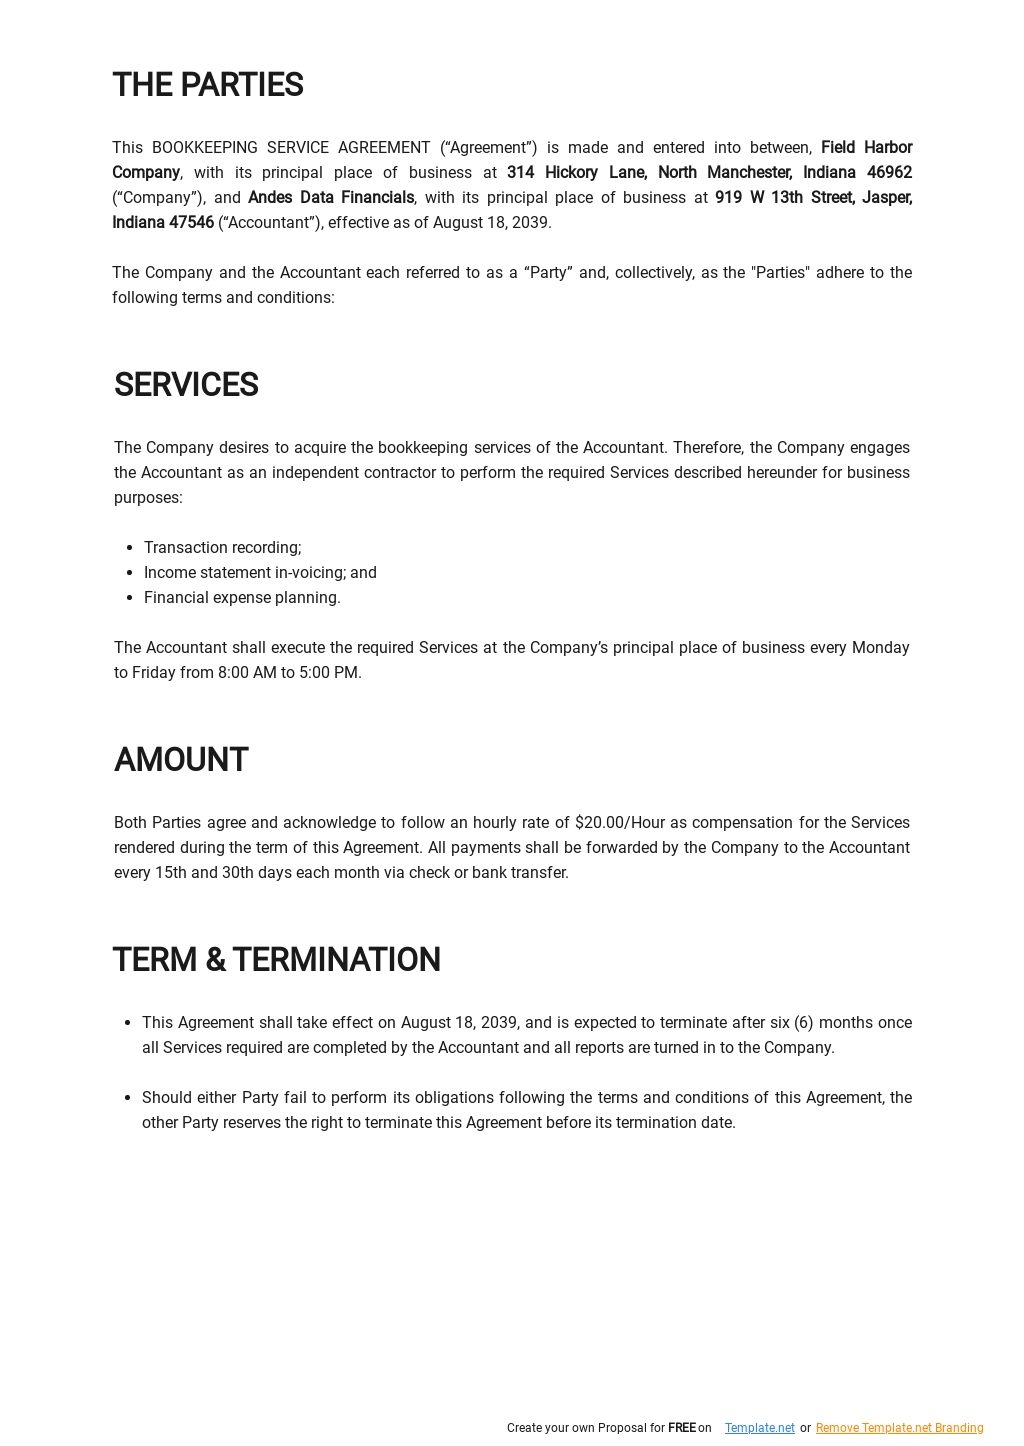 Bookkeeping Service Agreement Template 1.jpe